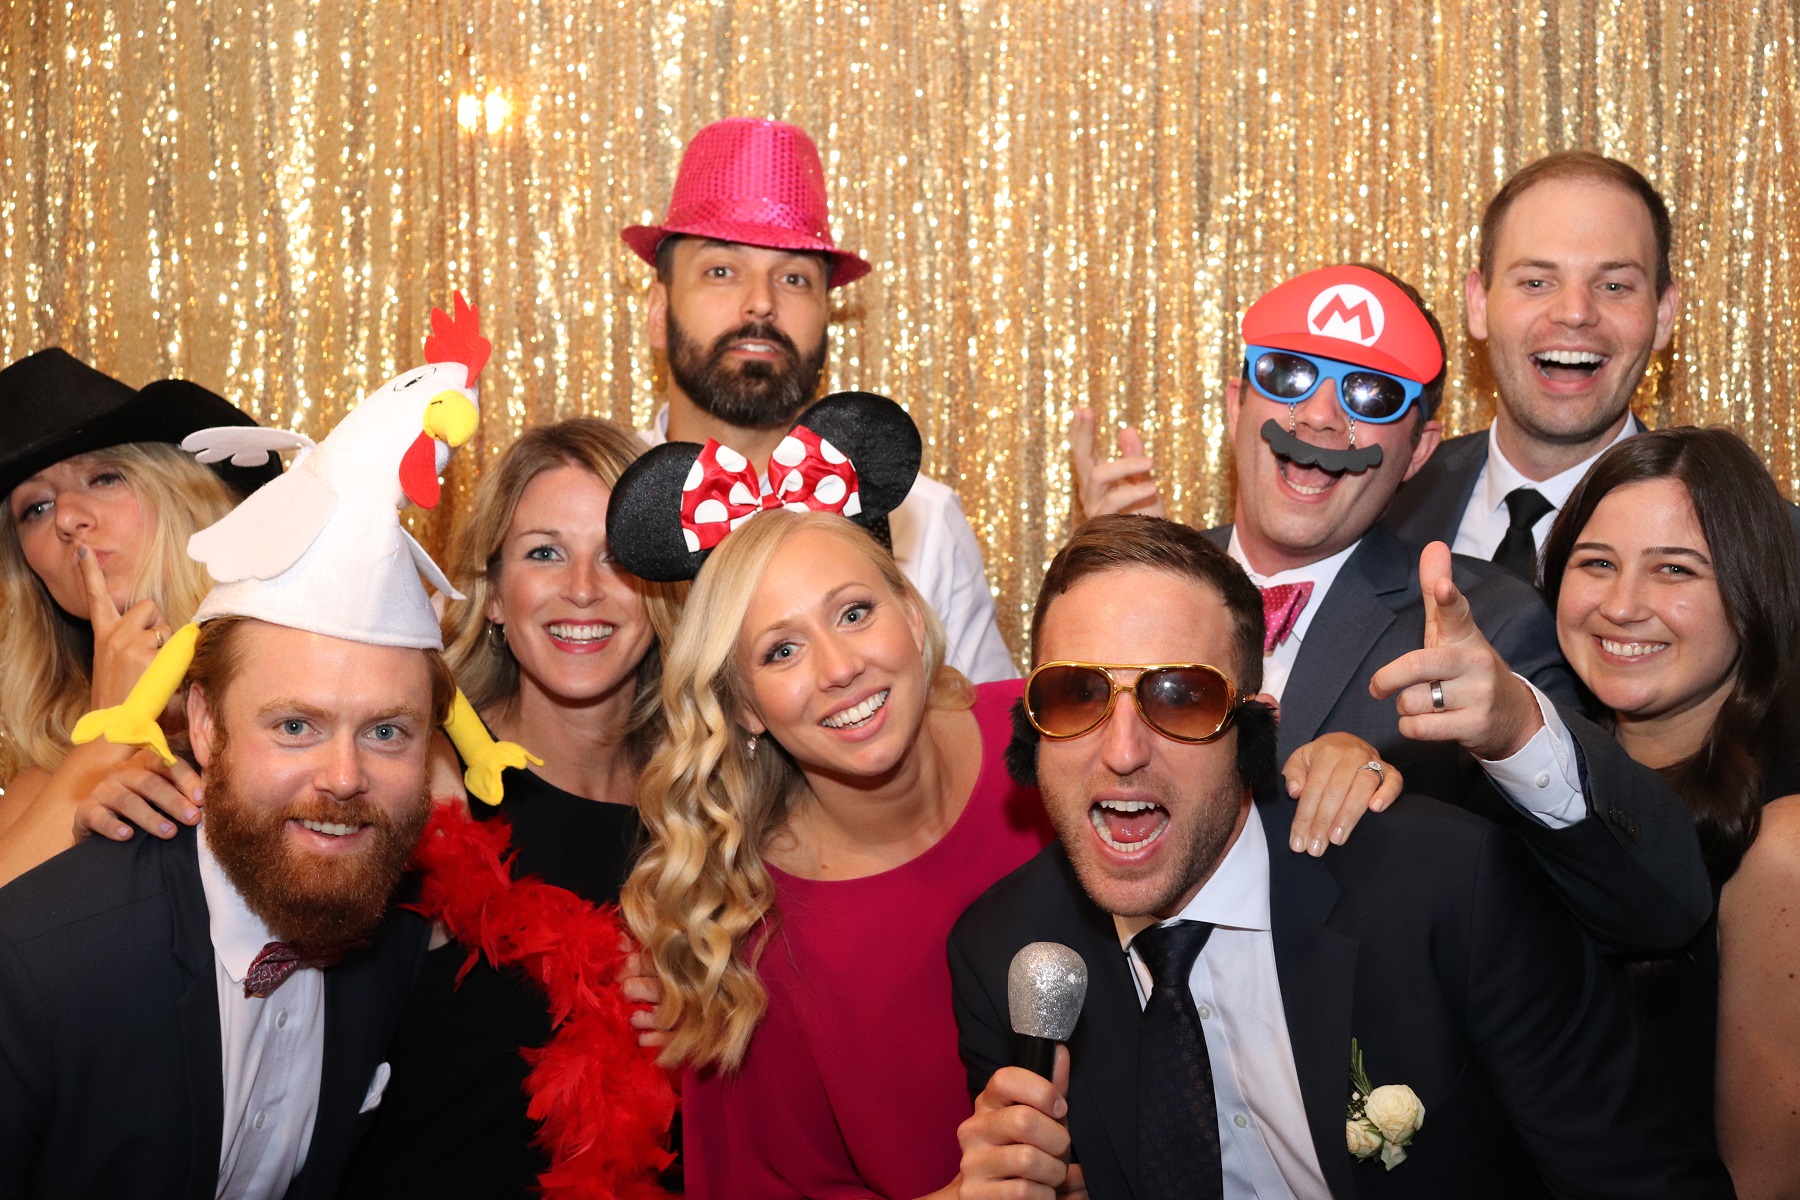 Add Fun and Flair to Your Events with a Rochester Photo Booth Rental